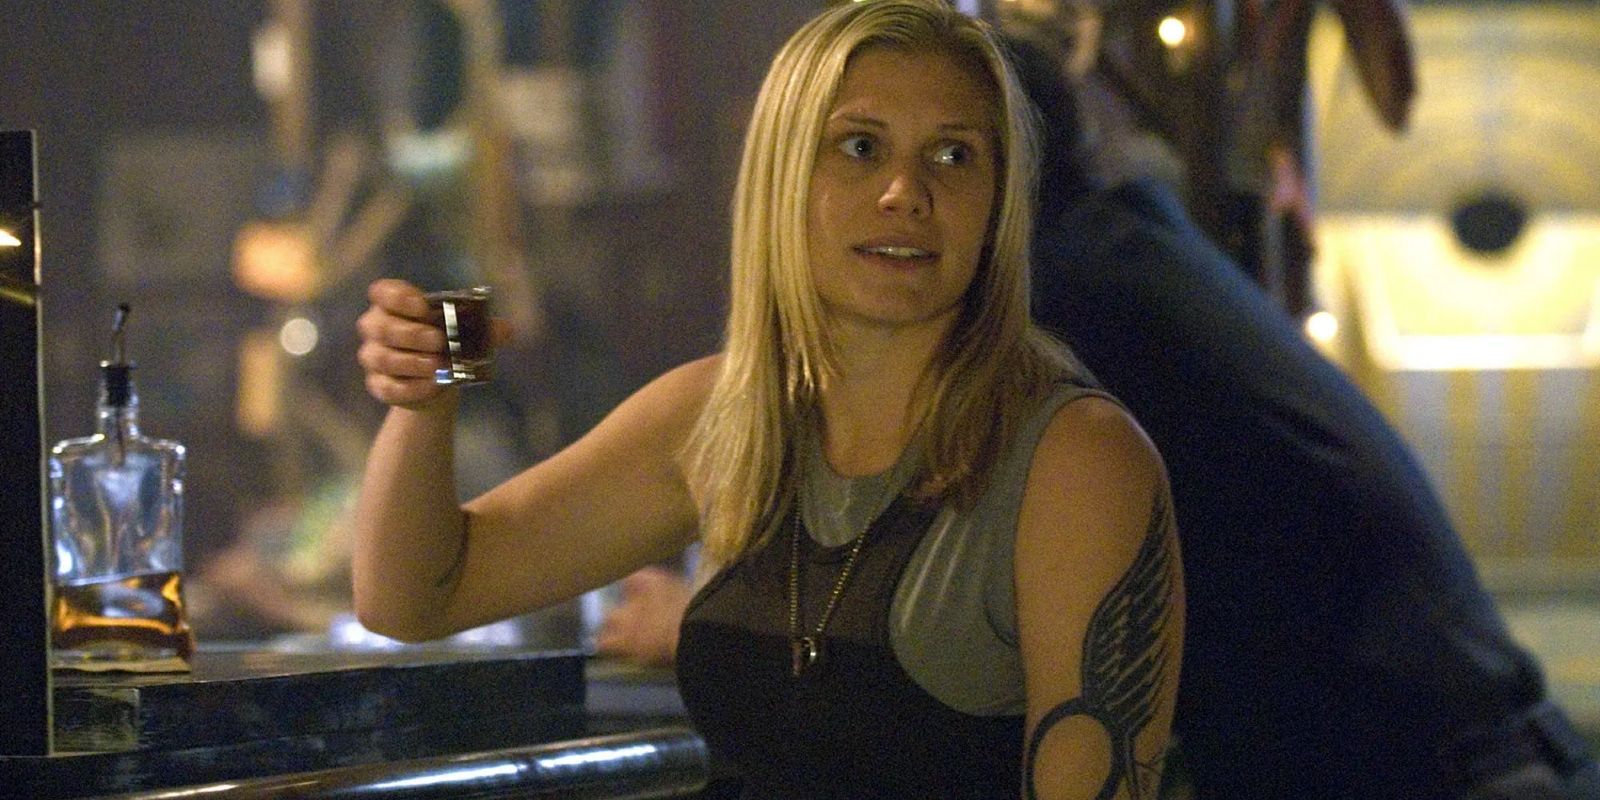 Starbuck (Katee Sackhoff) raises a shot glass into the air while sitting at a bar on Battlestar Galactica